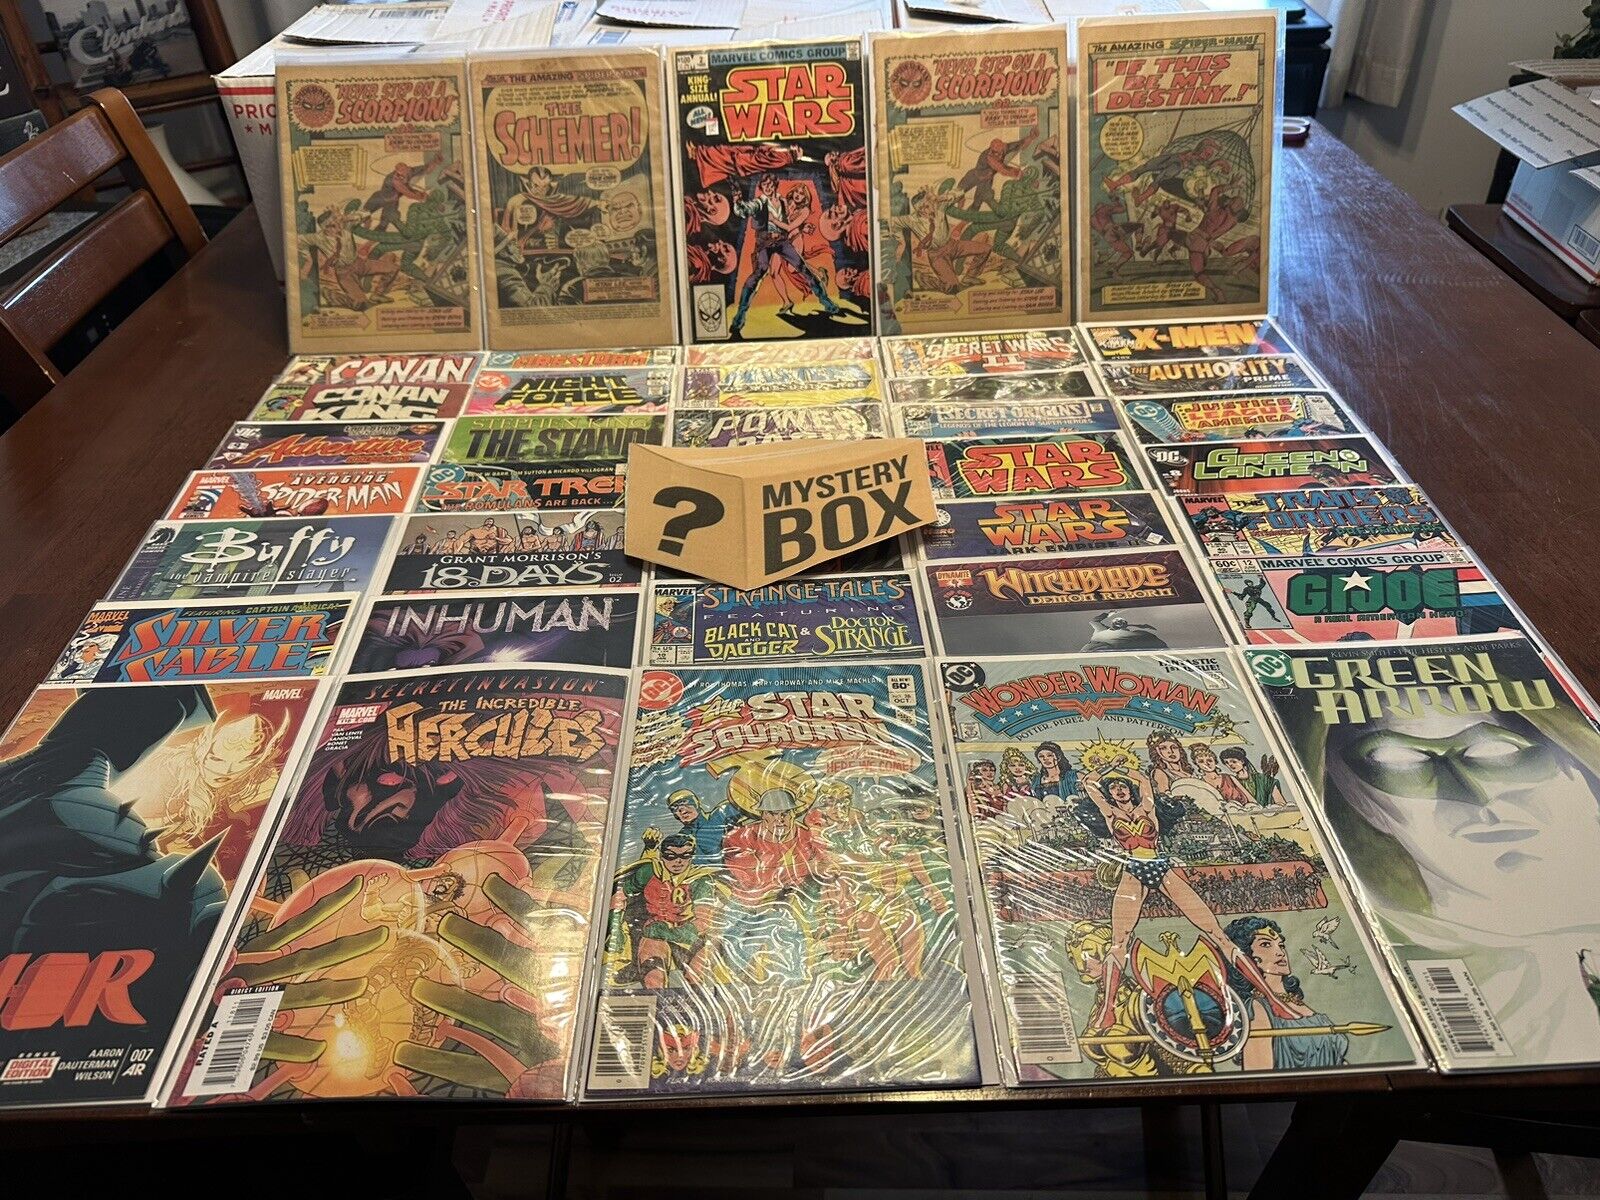 LARGE 25 COMICS BOOK LOT-MARVEL, DC, & others - Fast / 